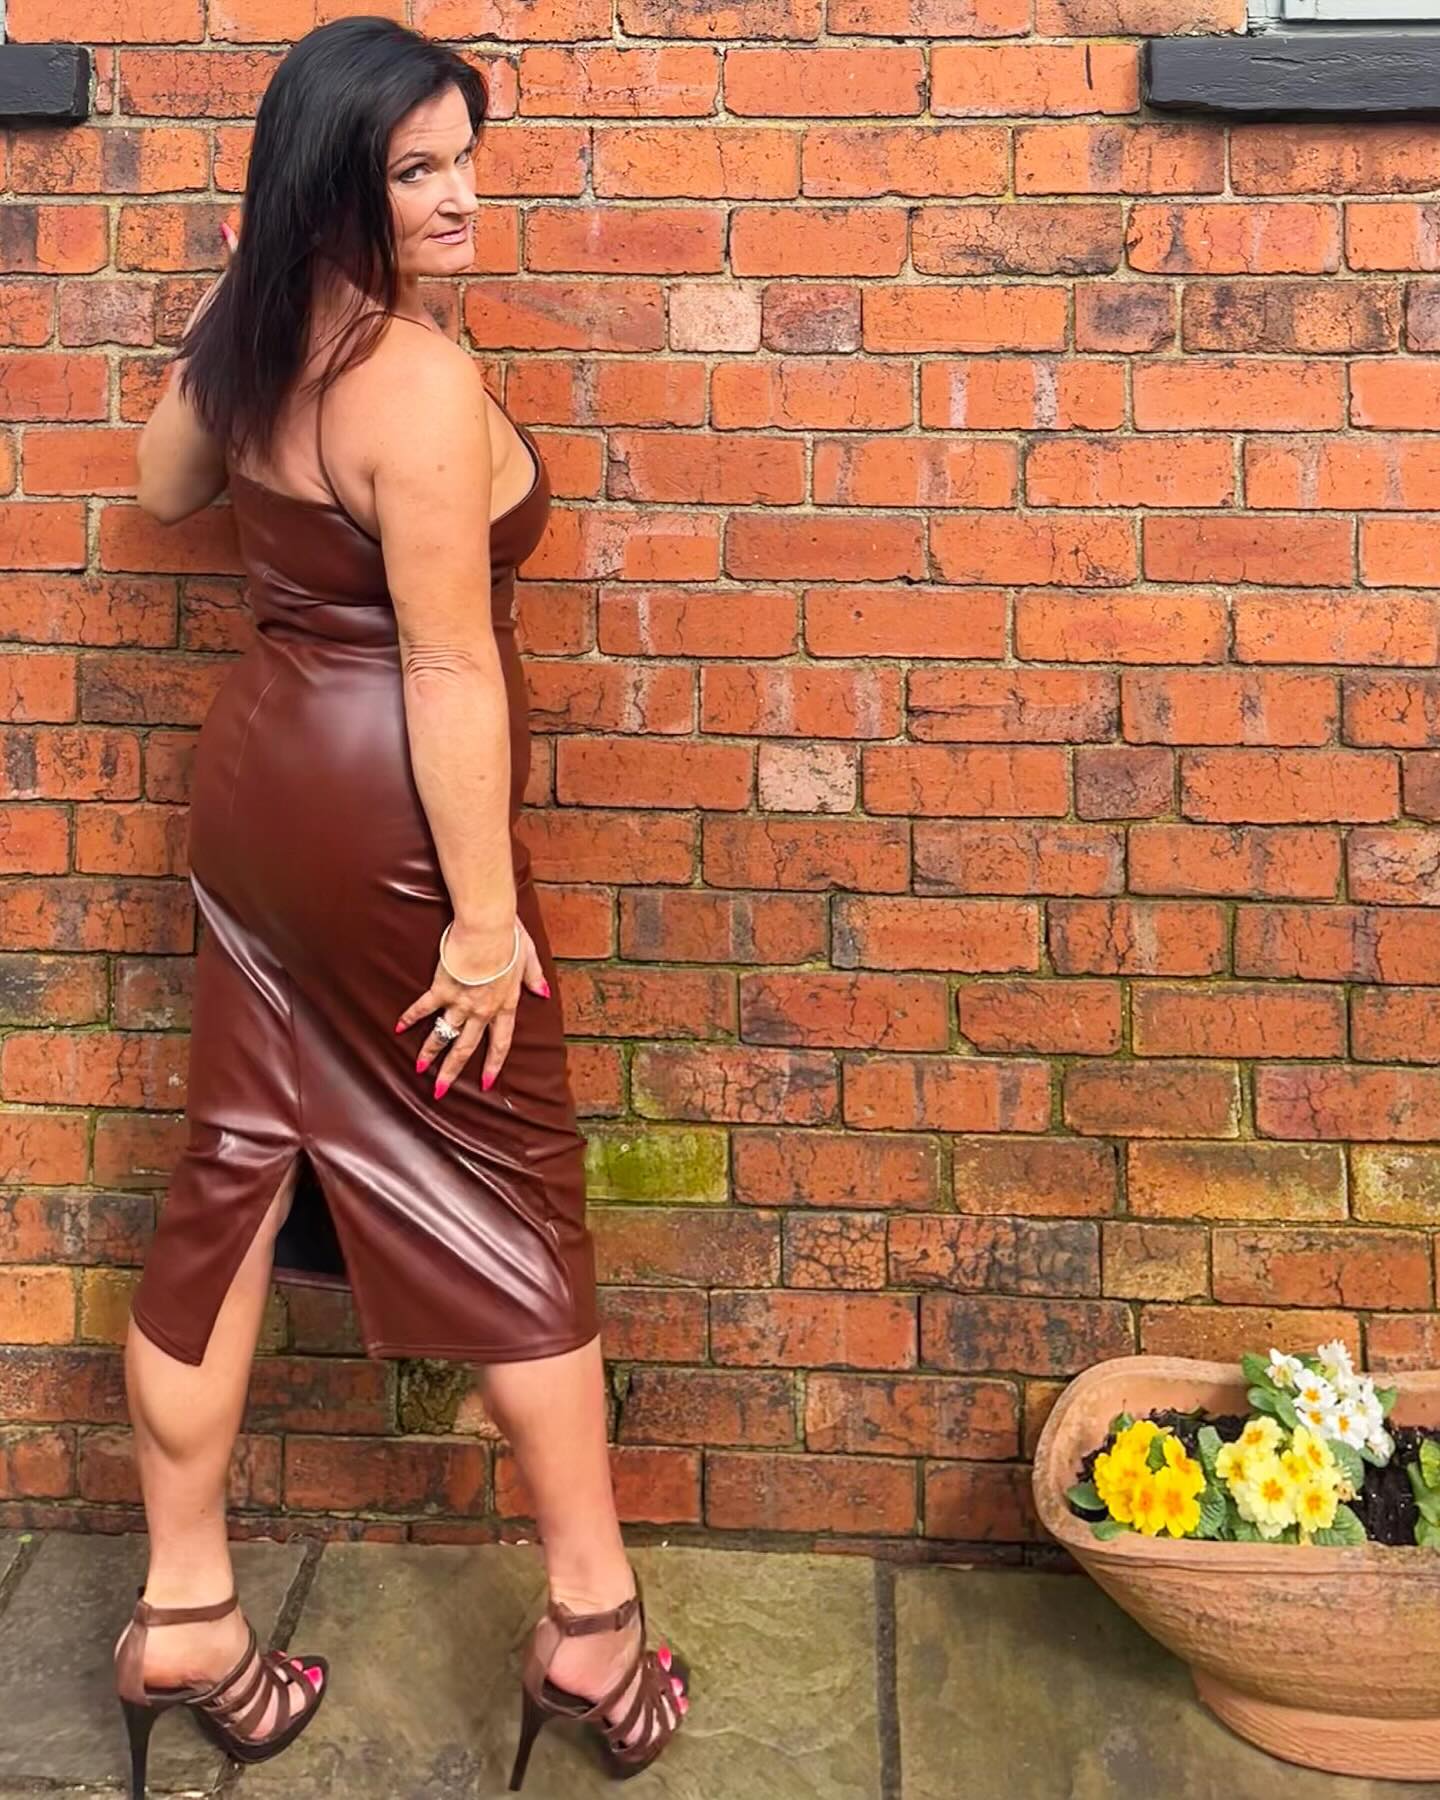 Chocolate brown leather beauty 🔥🤎
Swipe for hot Leather views 🍫👀🔚
Shiny brown leather midi Bodycon dress and strappy heels to match 🤎 
Taken in my garden at last !🪴☀️
Happy Thursday have a fab one ❤️
.
.
.
.
.
.
.
#leather #bodycon #mididress #womensfashion #style #ss24 #glam #elegant #brunette #ootd #highheels